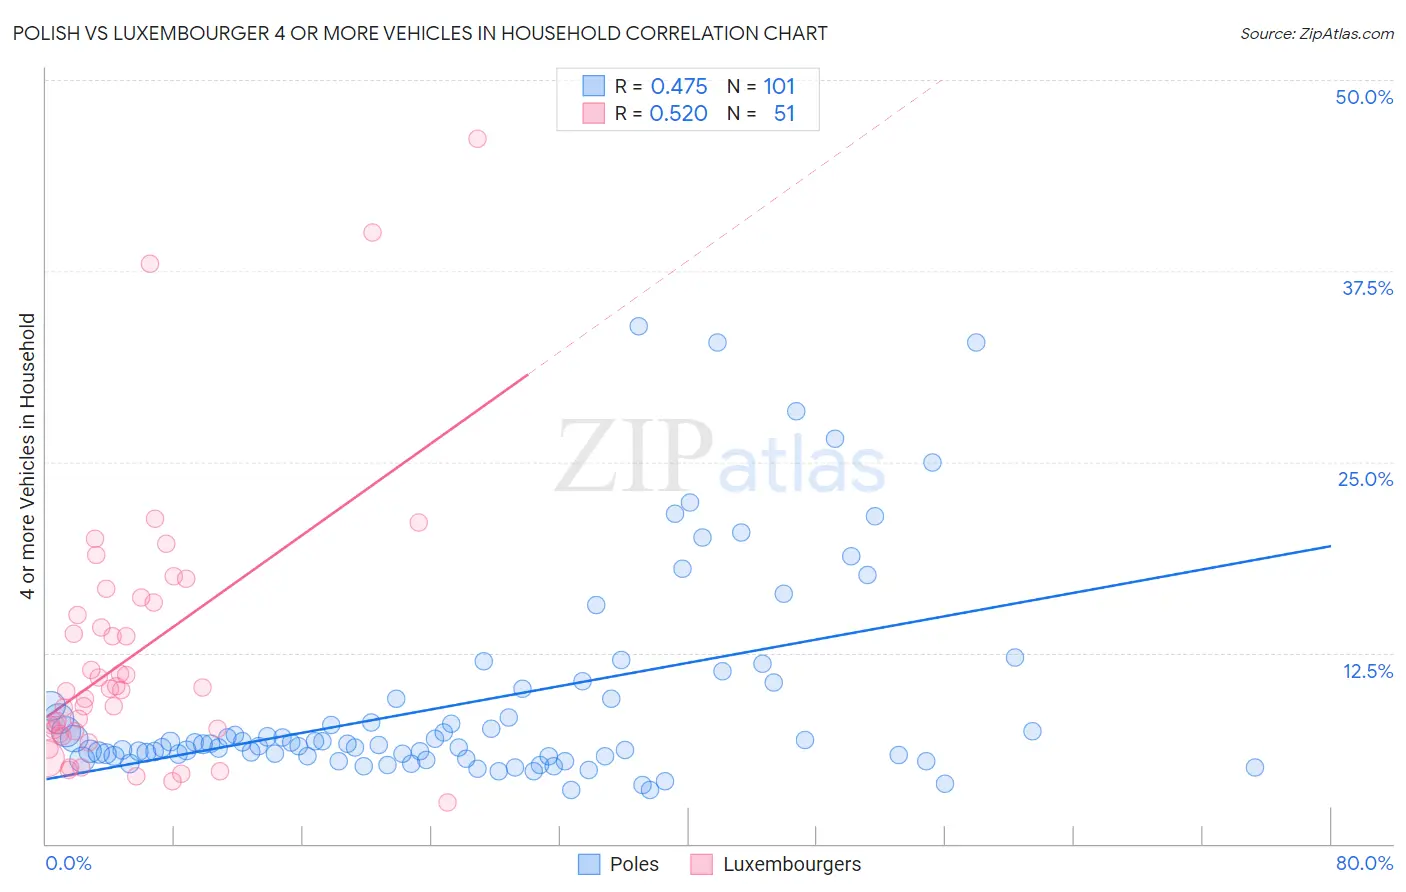 Polish vs Luxembourger 4 or more Vehicles in Household